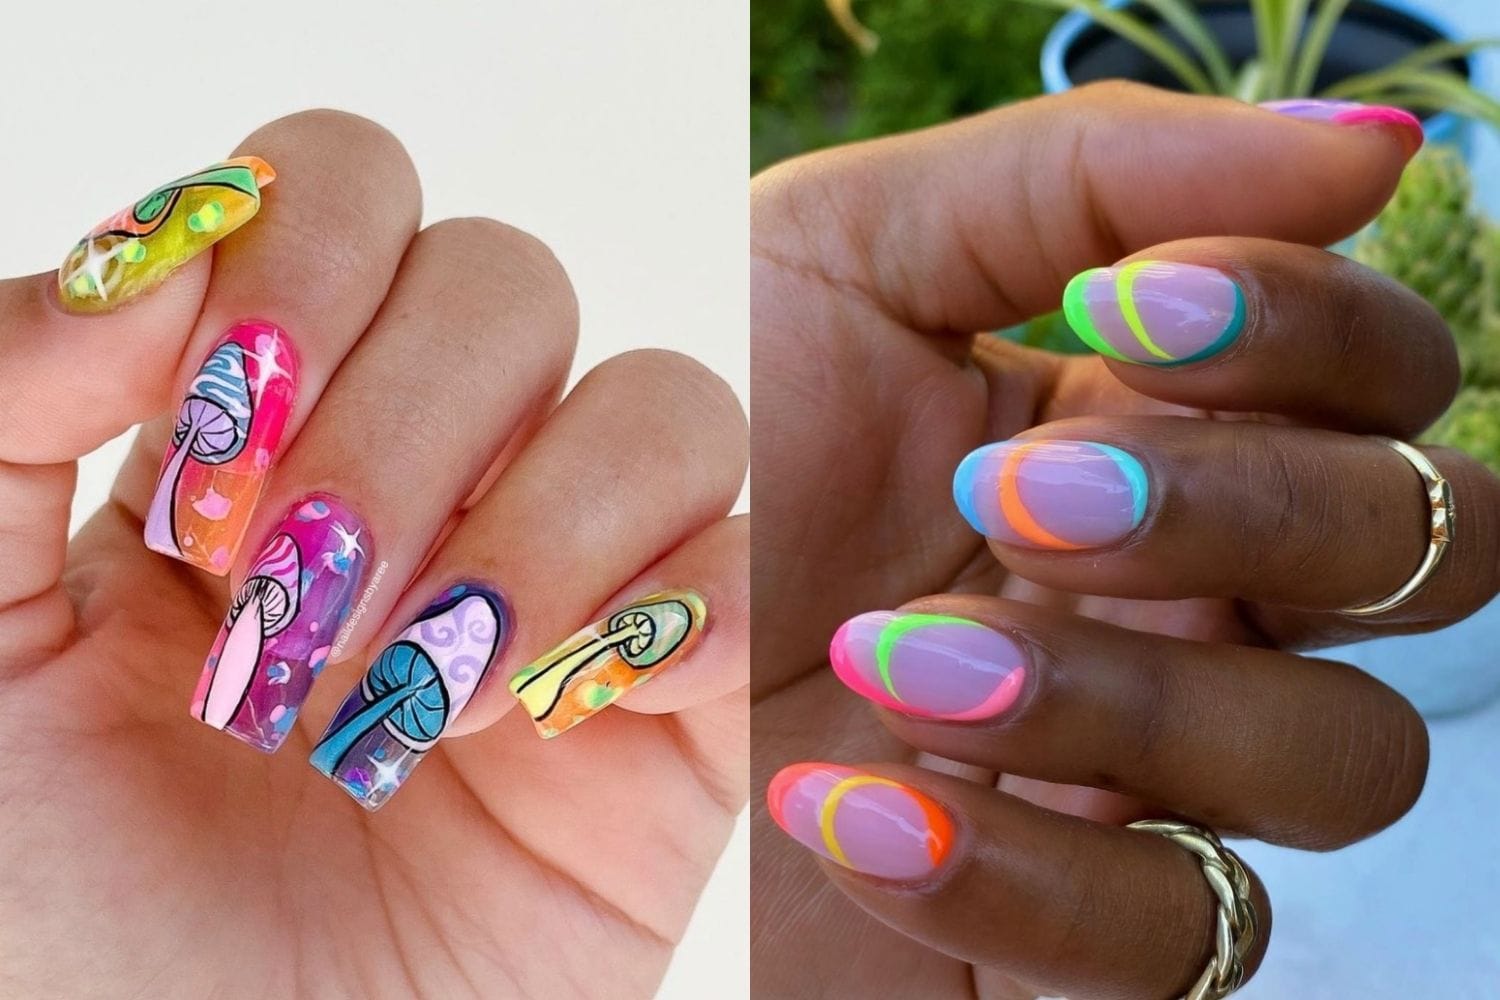 Neon Nail Art Ideas That Will Make You Stand Out - wide 5